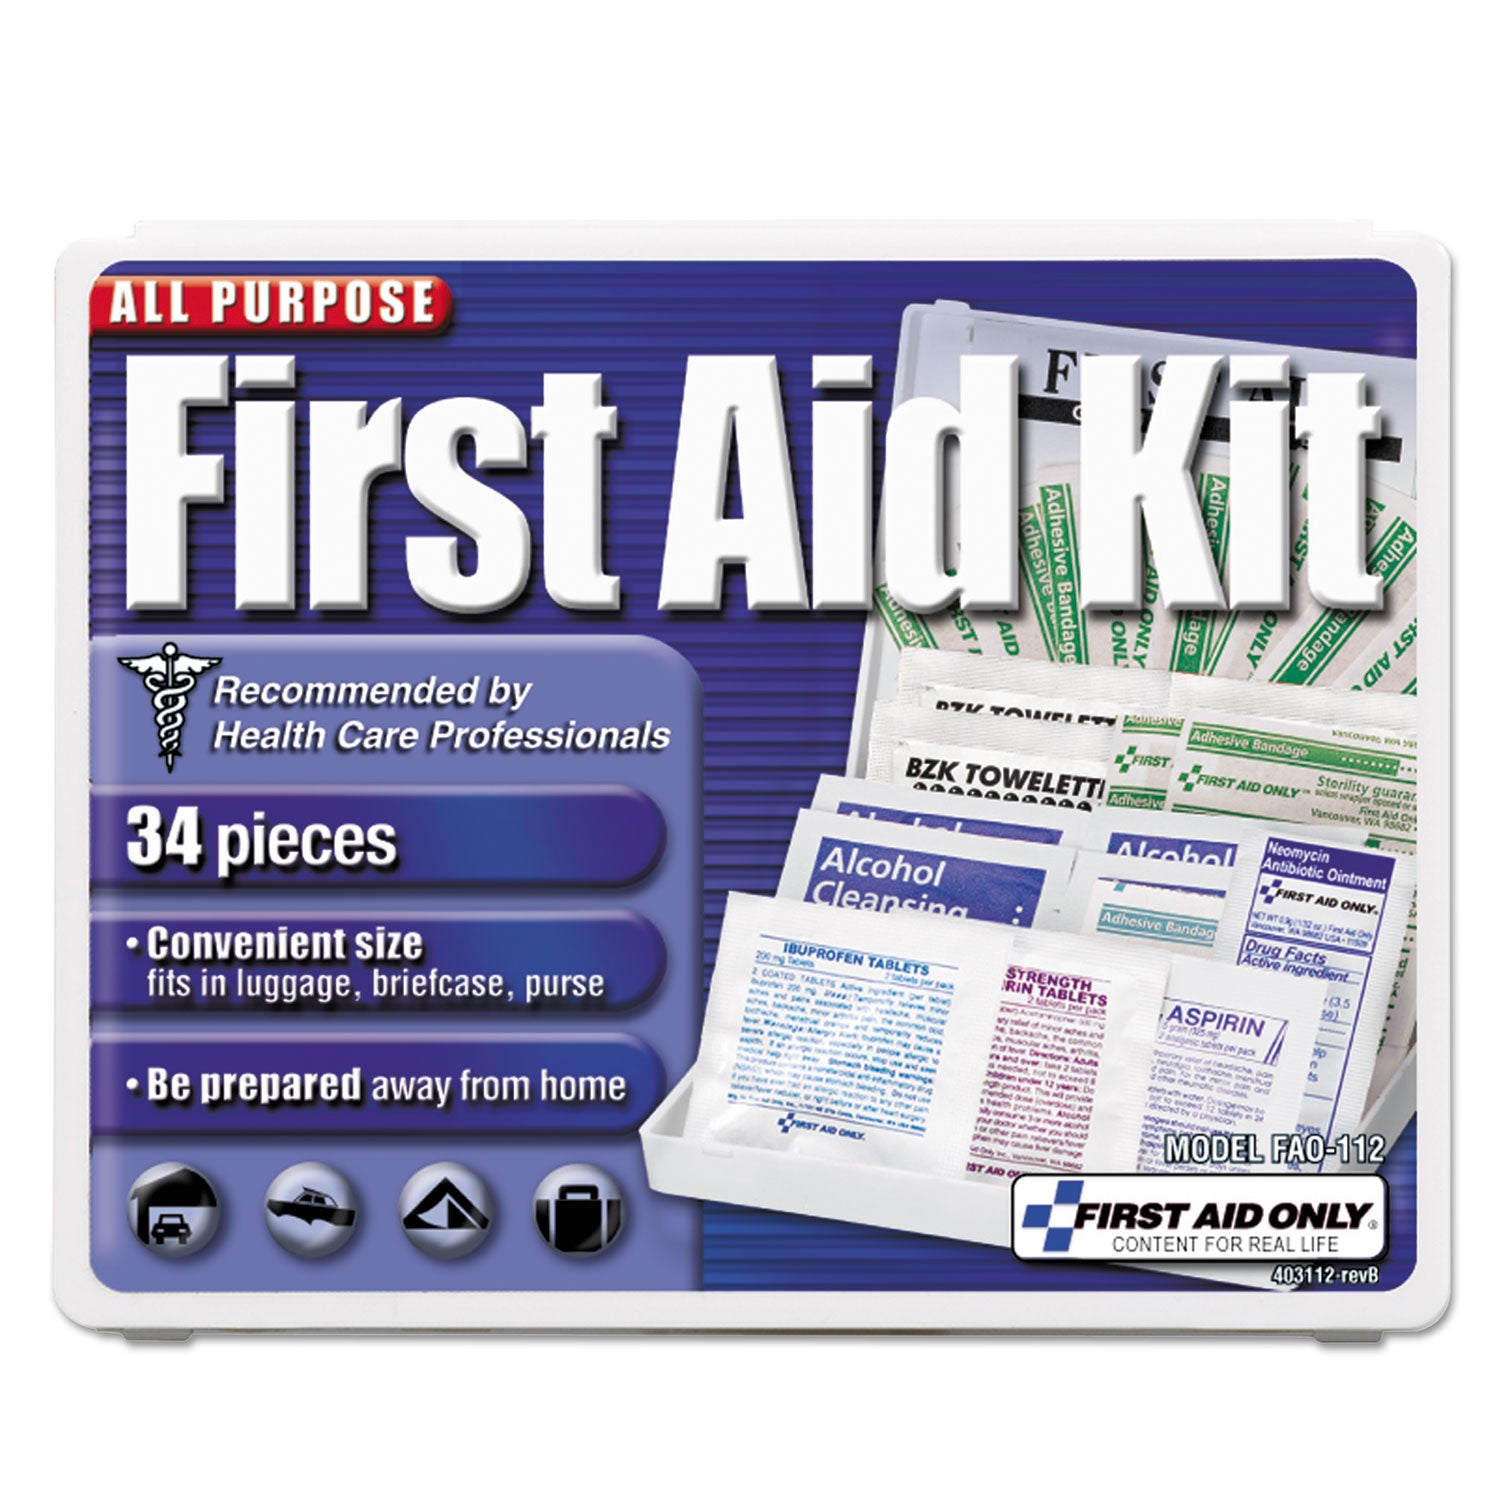 all-purpose-first-aid-kit-34-pieces-374-x-475-34-pieces-plastic-case_fao112 - 1